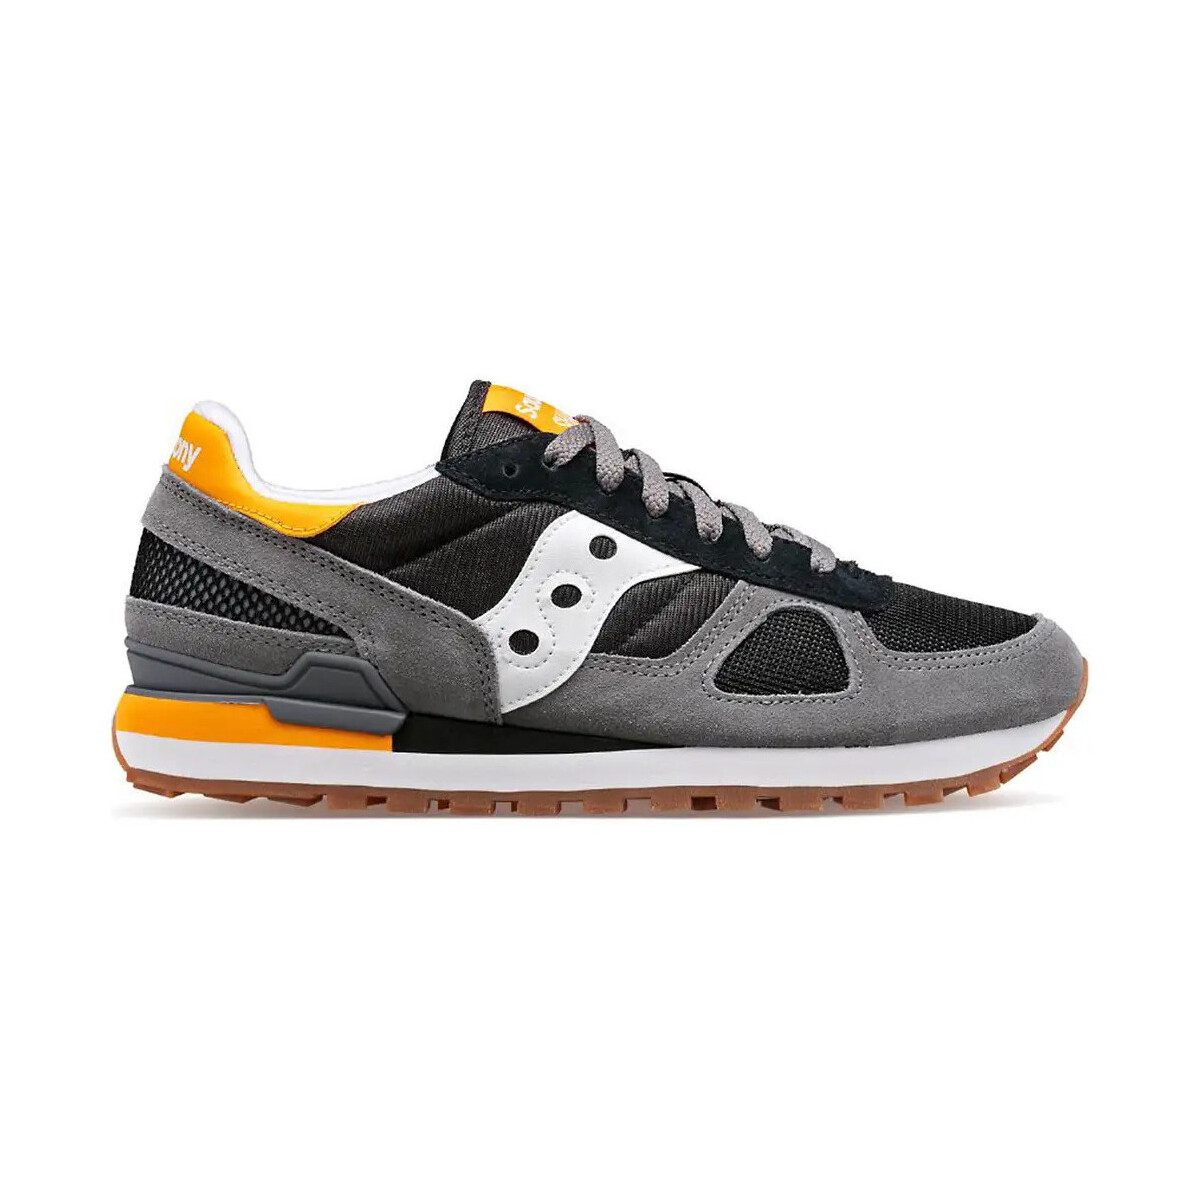 Chaussures Homme Saucony Omni 20 Xialing Shadow Original Gris